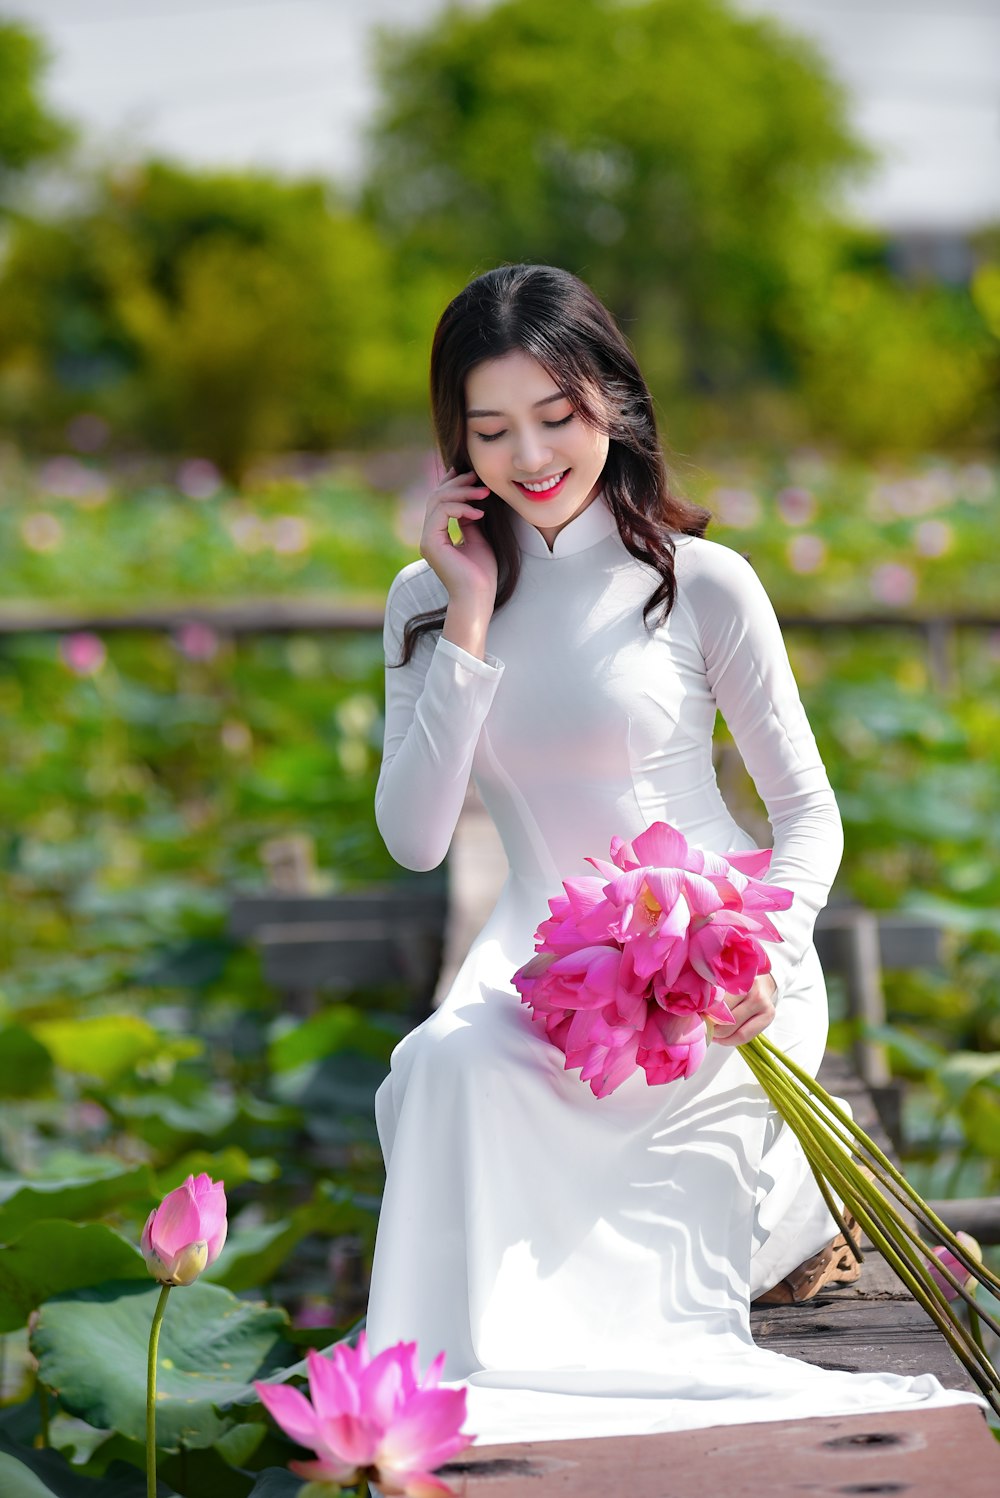 woman in white long sleeve dress holding pink flower